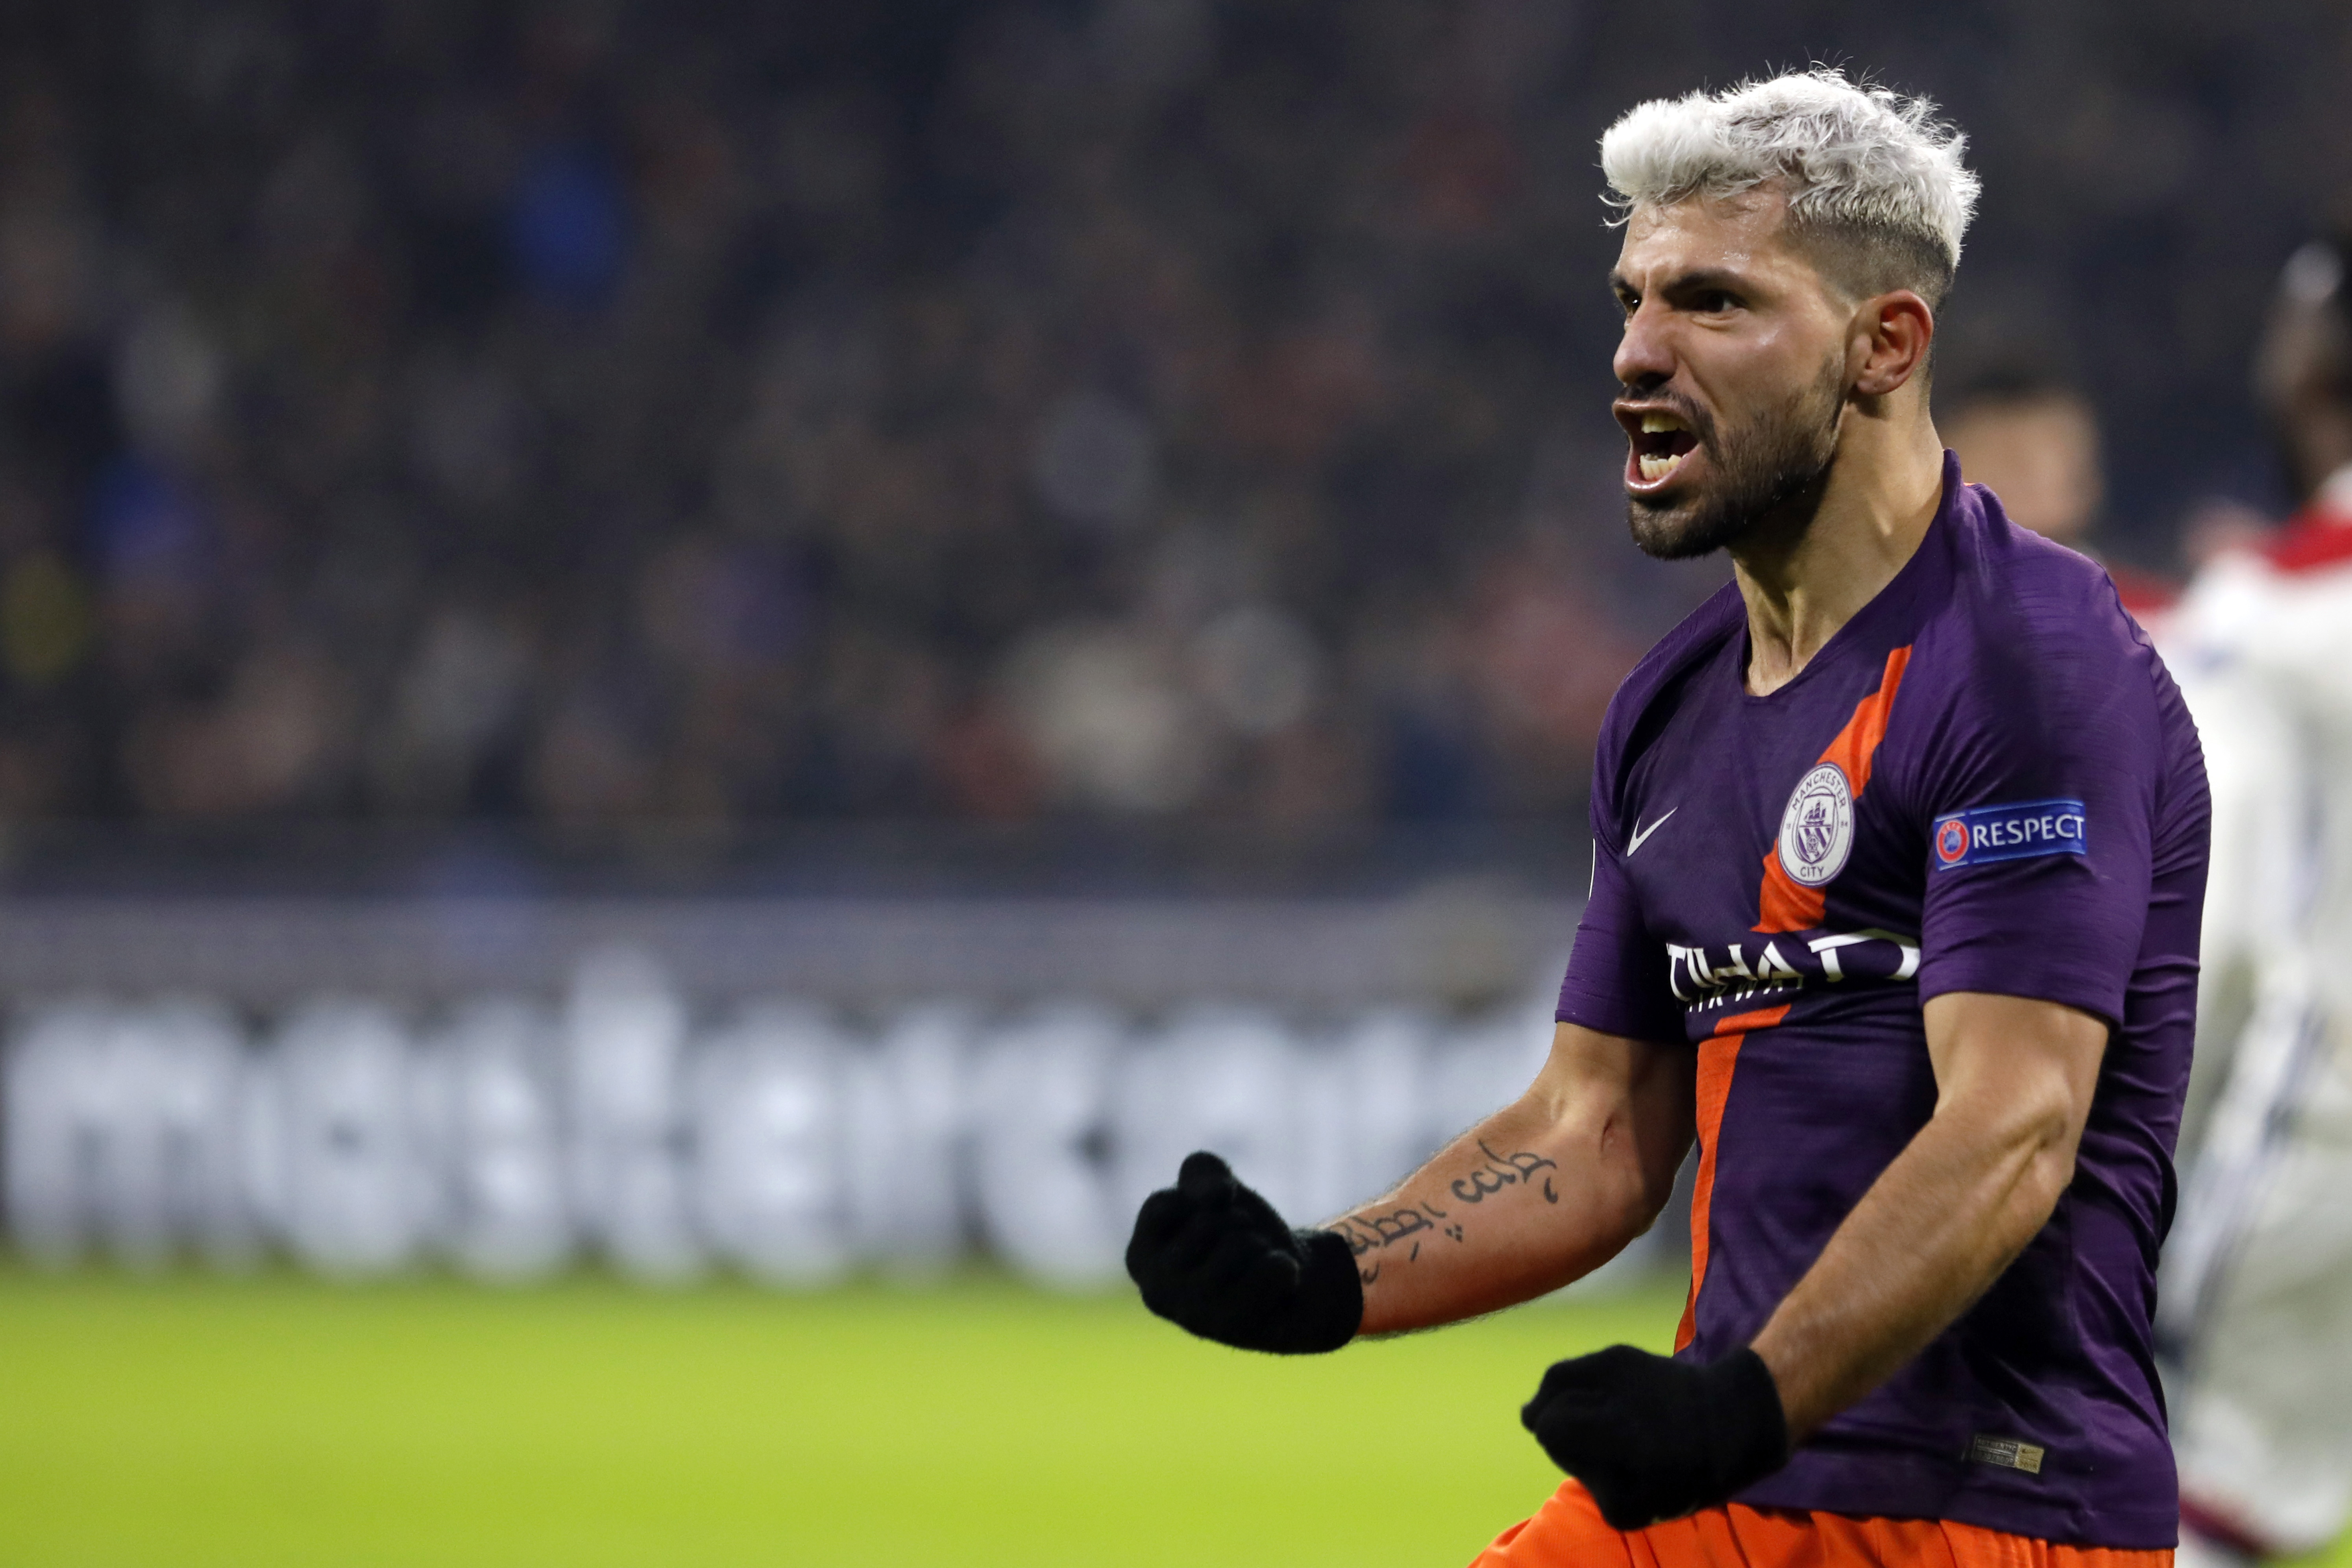 Man City advances in Champions League with 2-2 draw at Lyon